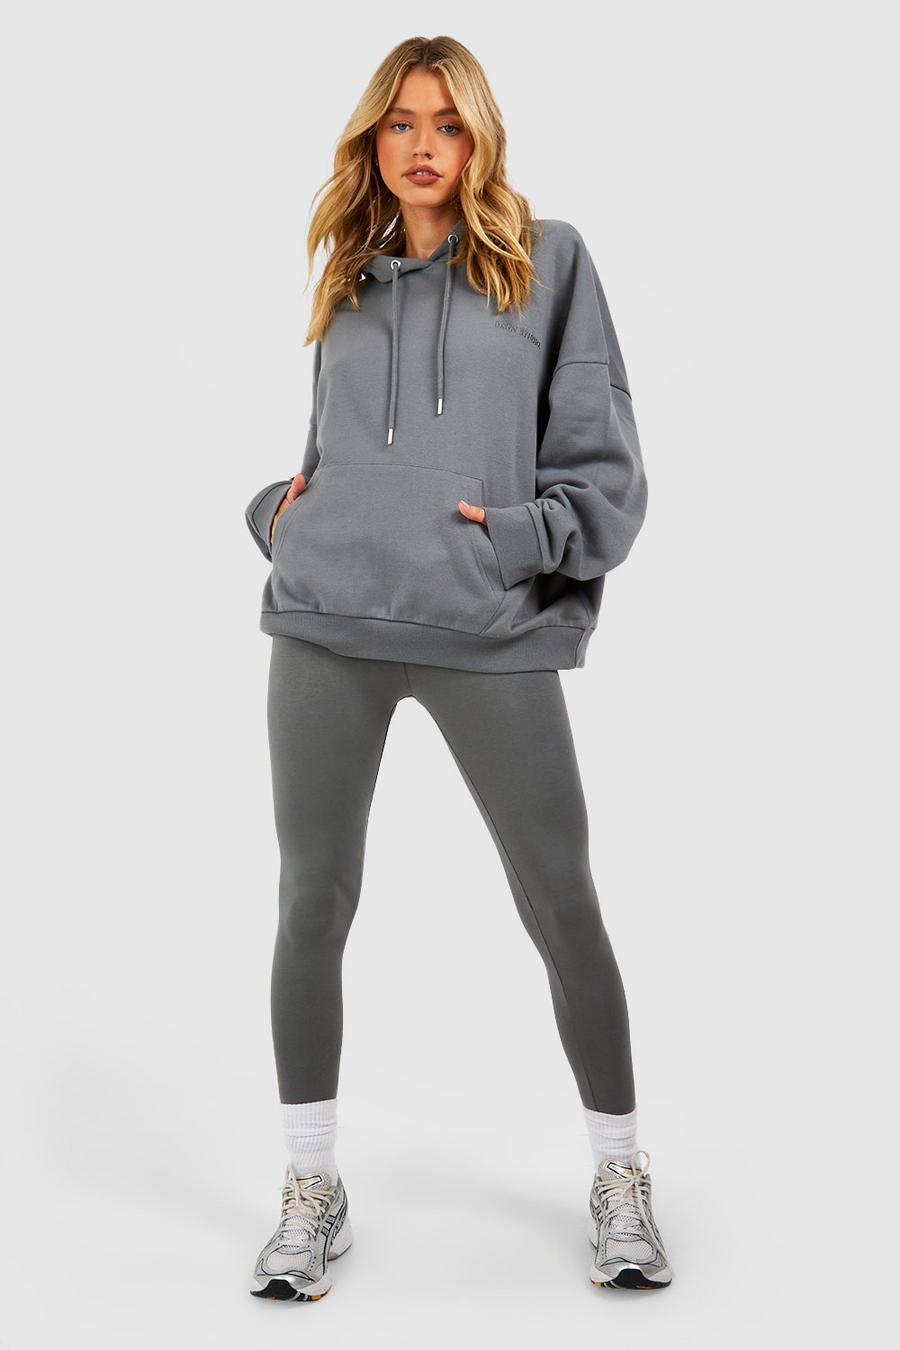 Charcoal Dsgn Studio Oversized Hoodie And Legging Tracksuit image number 1